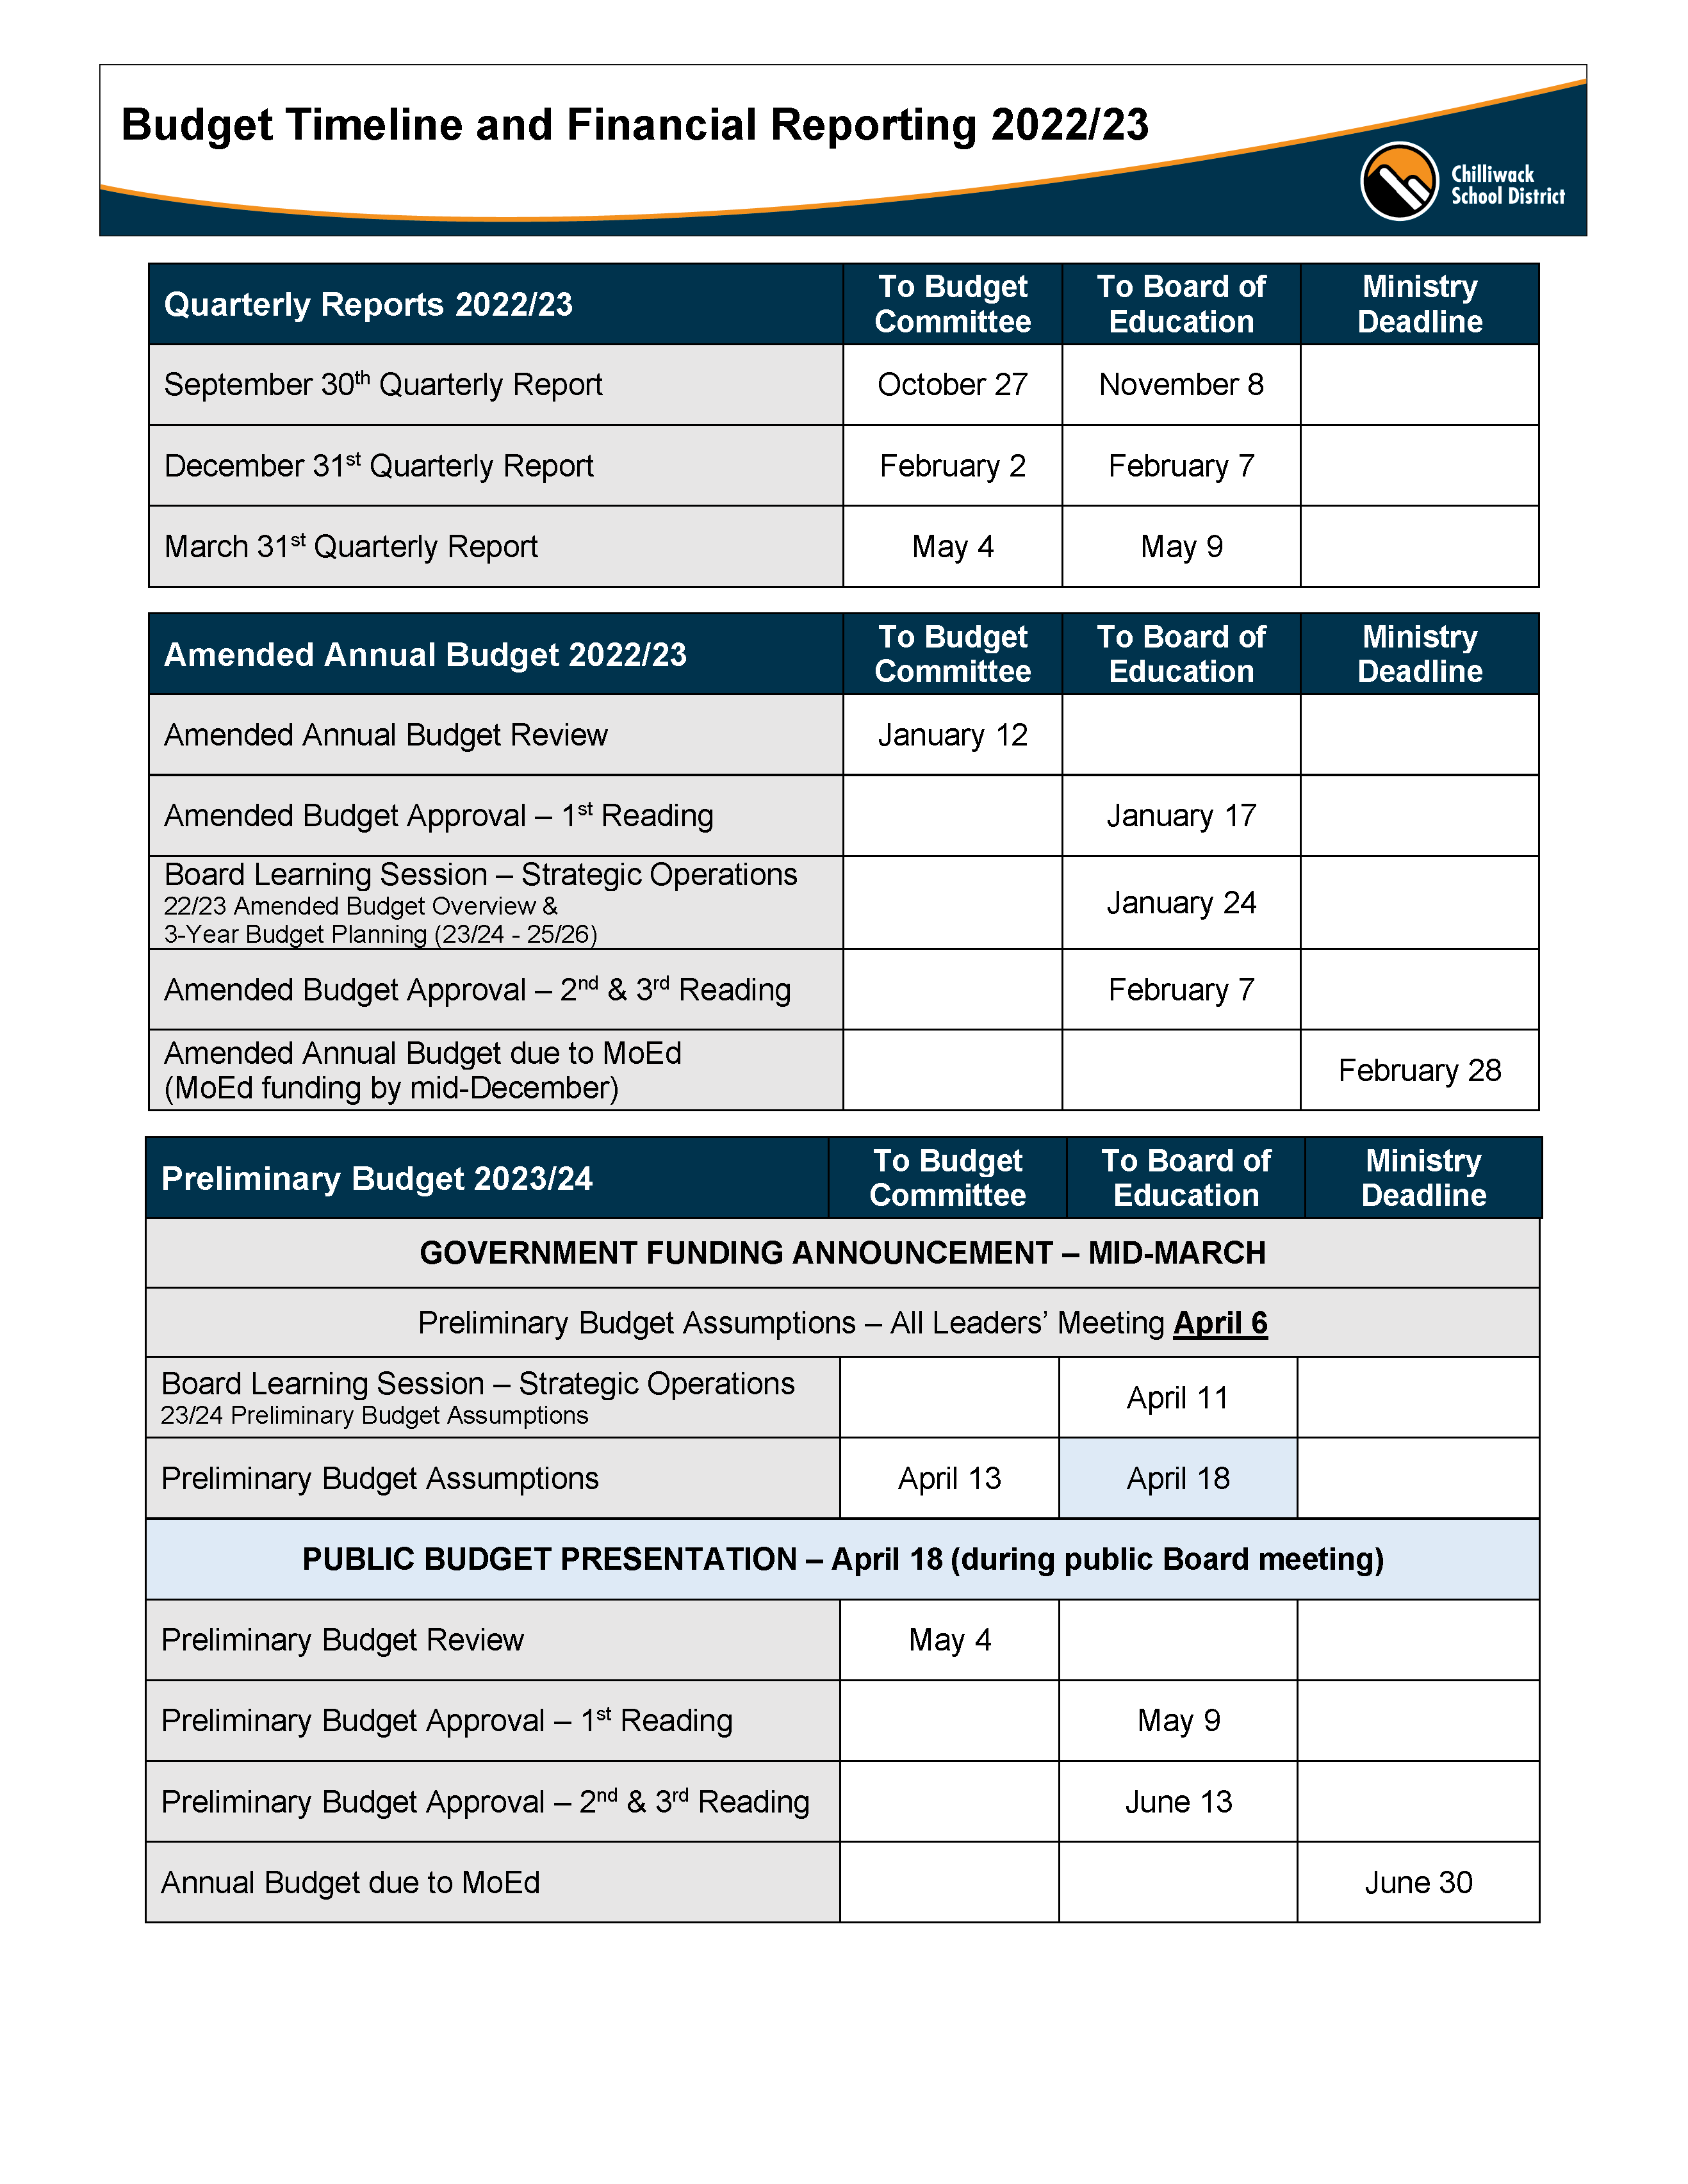 Budget Timeline and Financial Reporting 2022-23